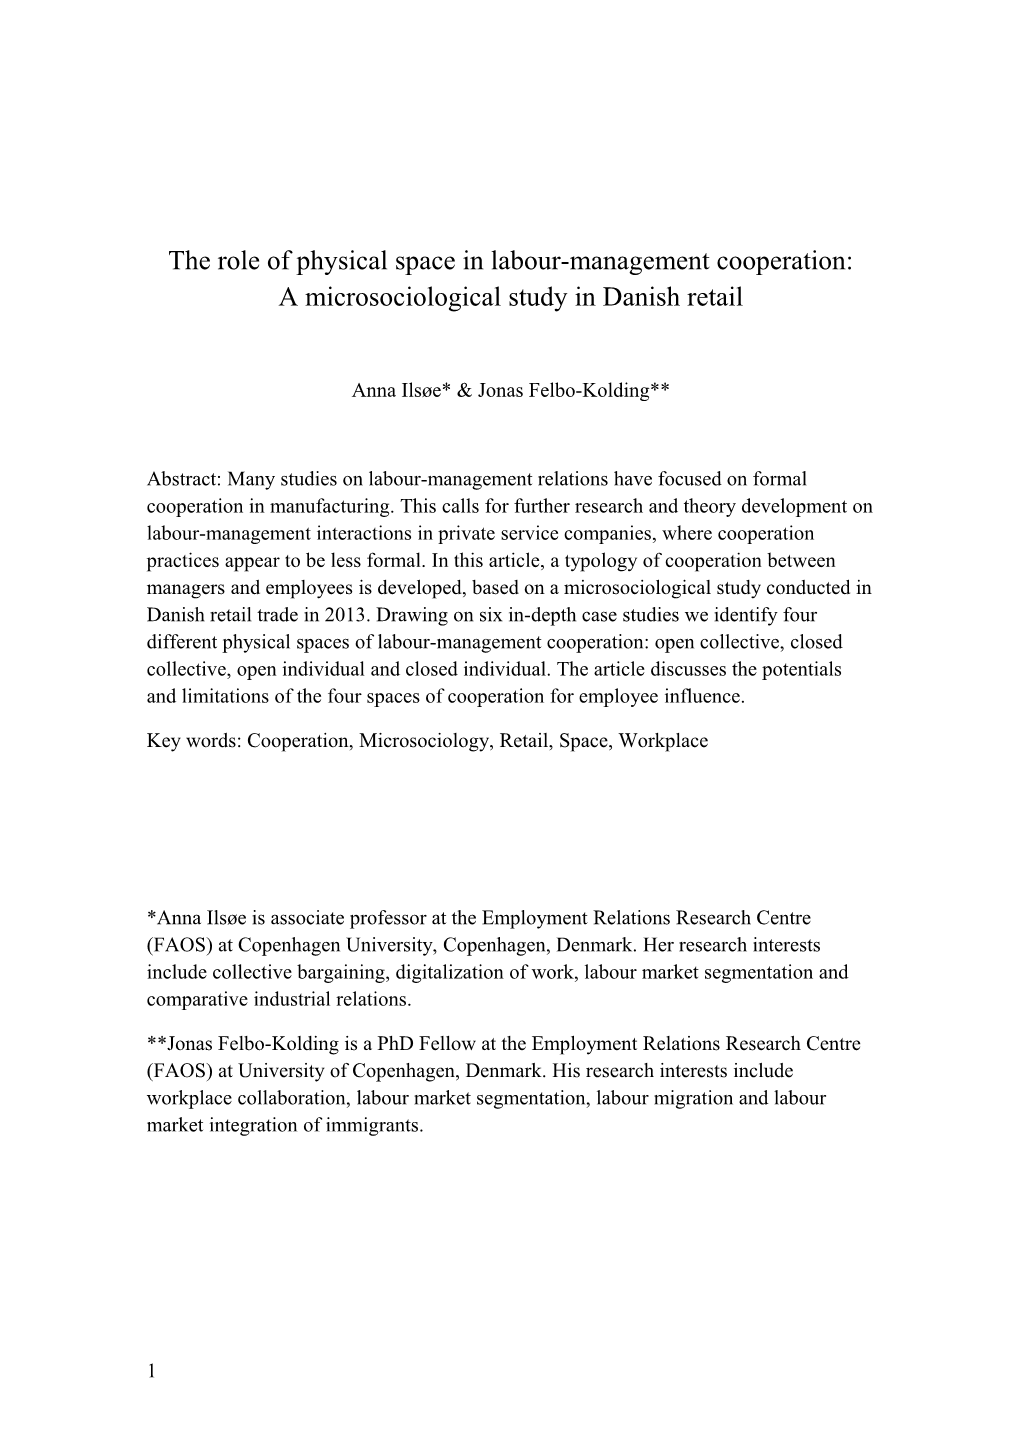 The Role of Physical Space in Labour-Management Cooperation: a Microsociological Study